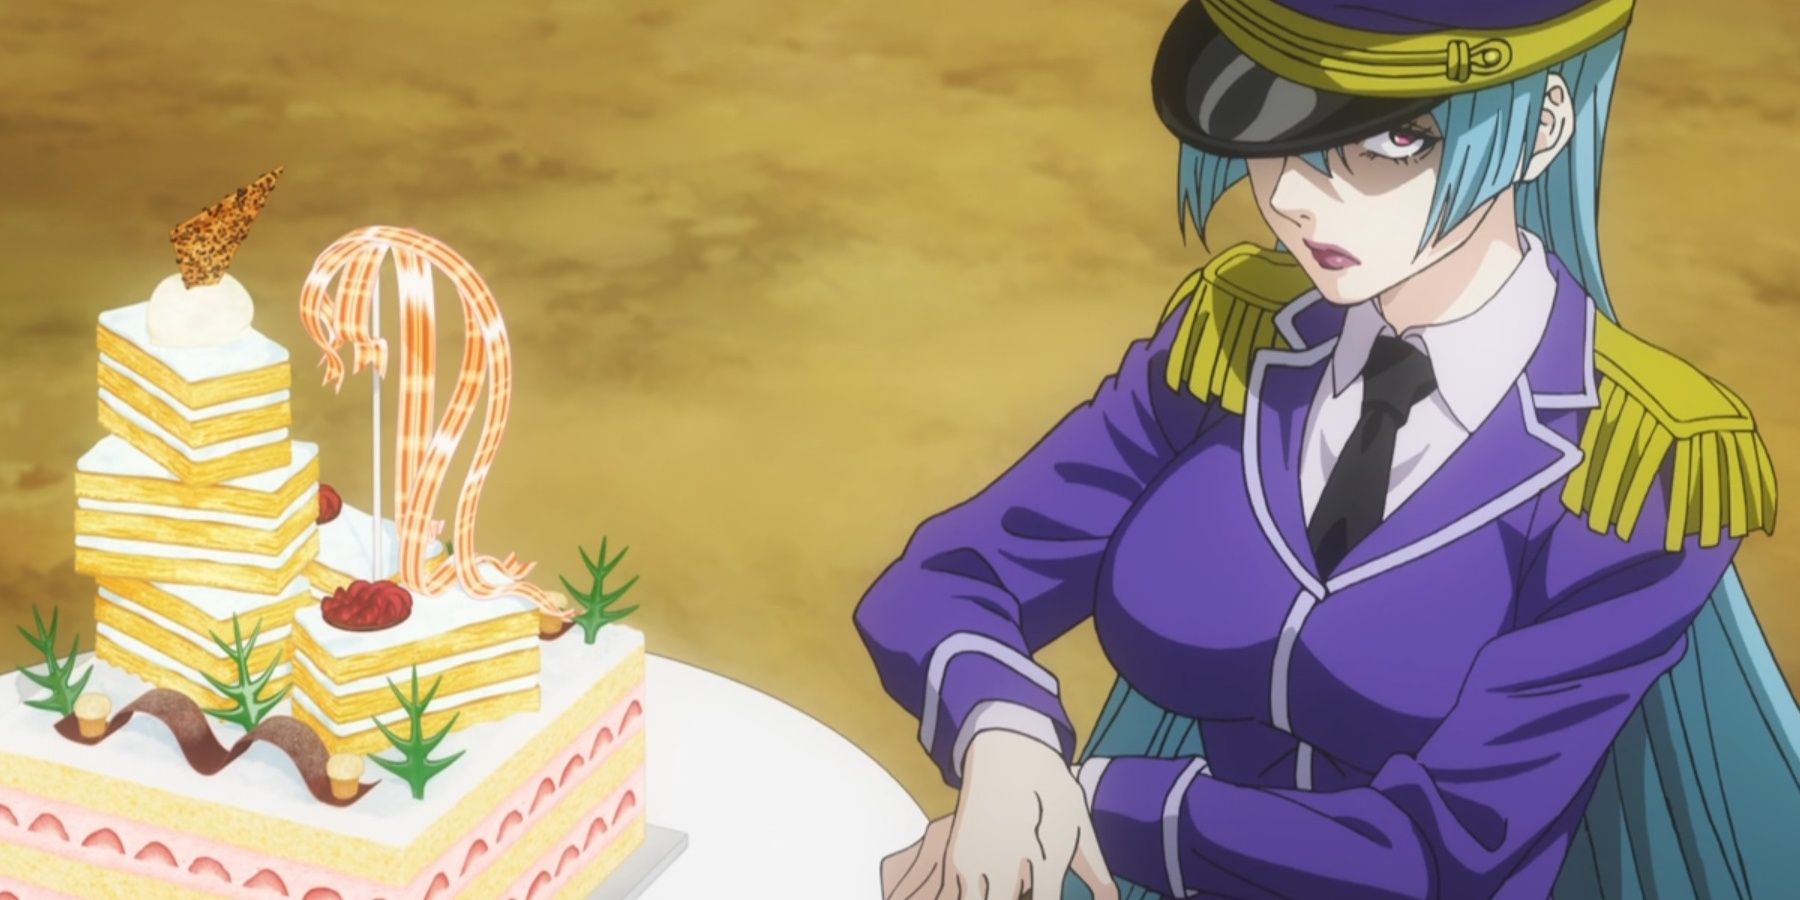 Food Wars!: Soma Faces Sarge in an Explosive Bake-Off